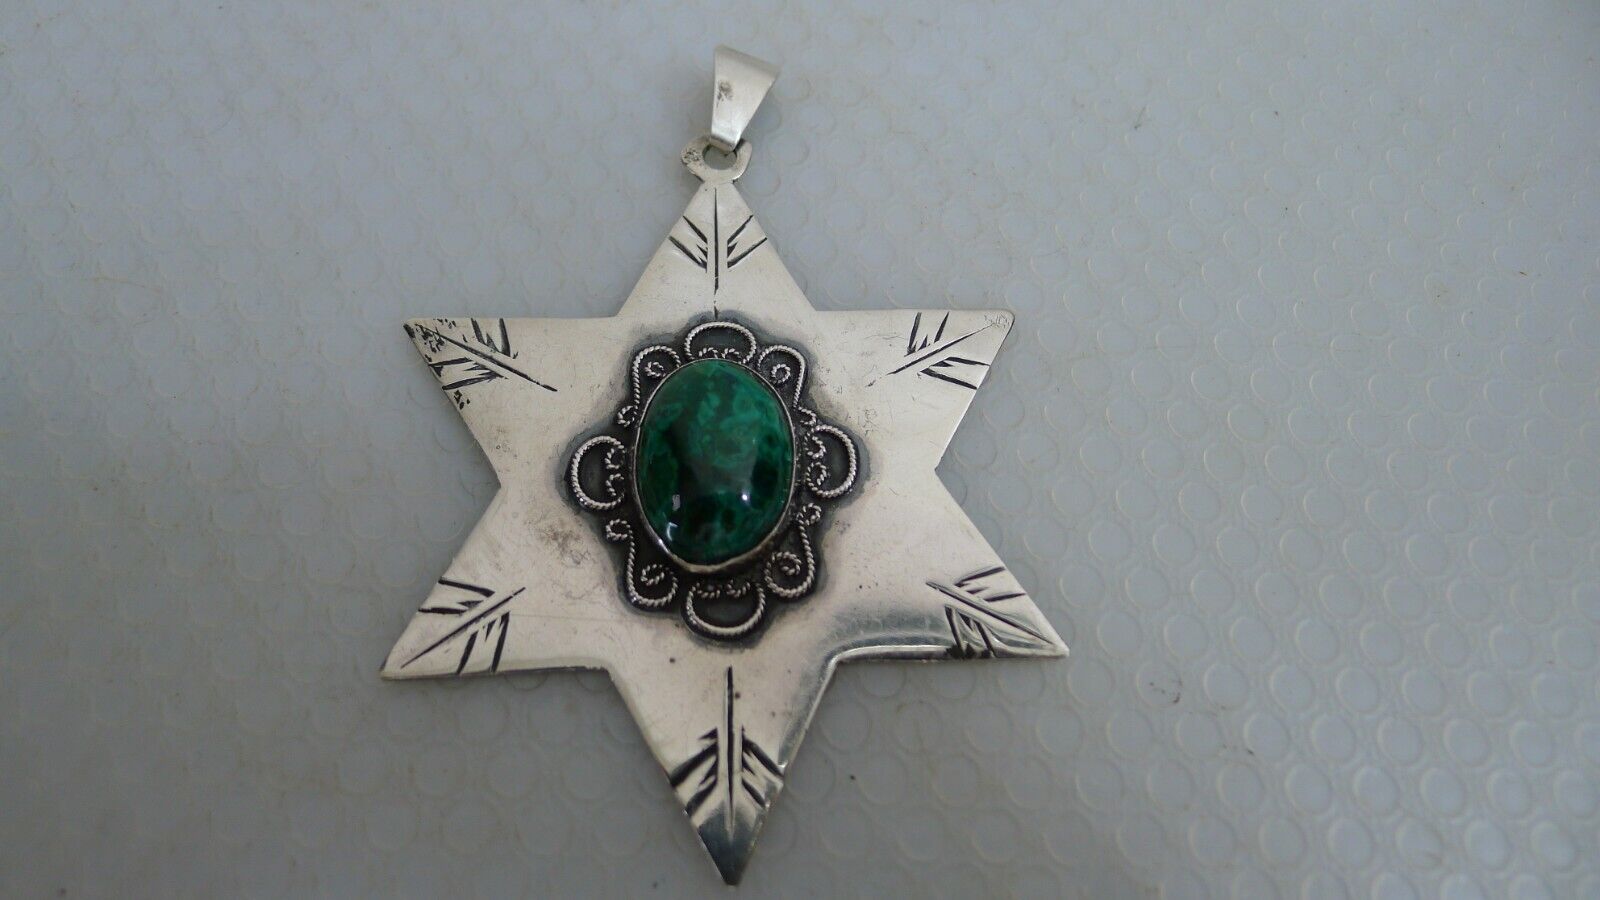 Vintage David's Star Shield Silver Charm Pendant With Eilat Stone